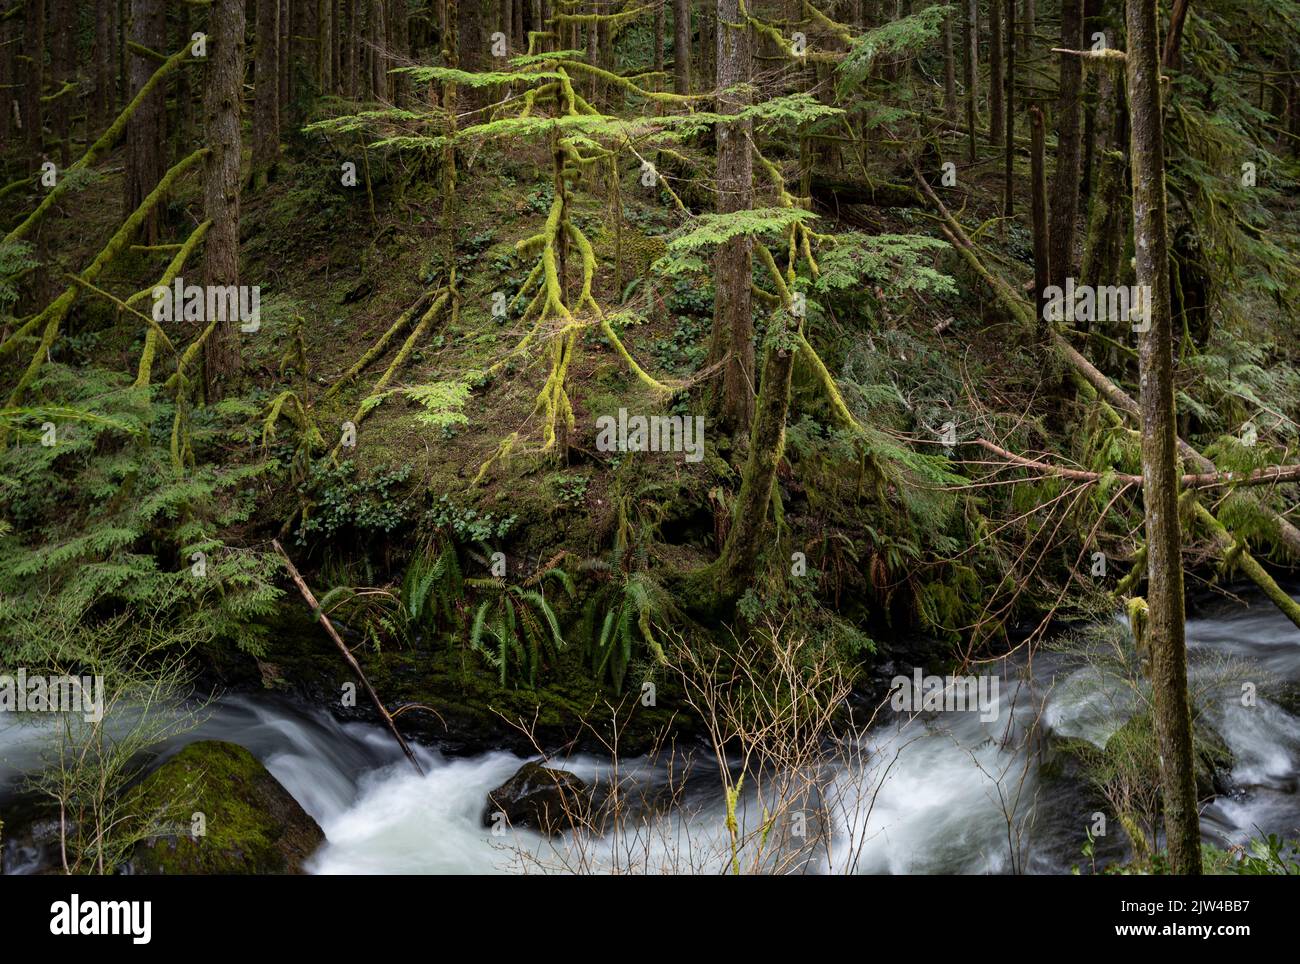 WA21954-00...WASHINGTON - Small tree almost entirely covered with moss along the Greg Ball Trail in Wallace Falls State Park. Stock Photo